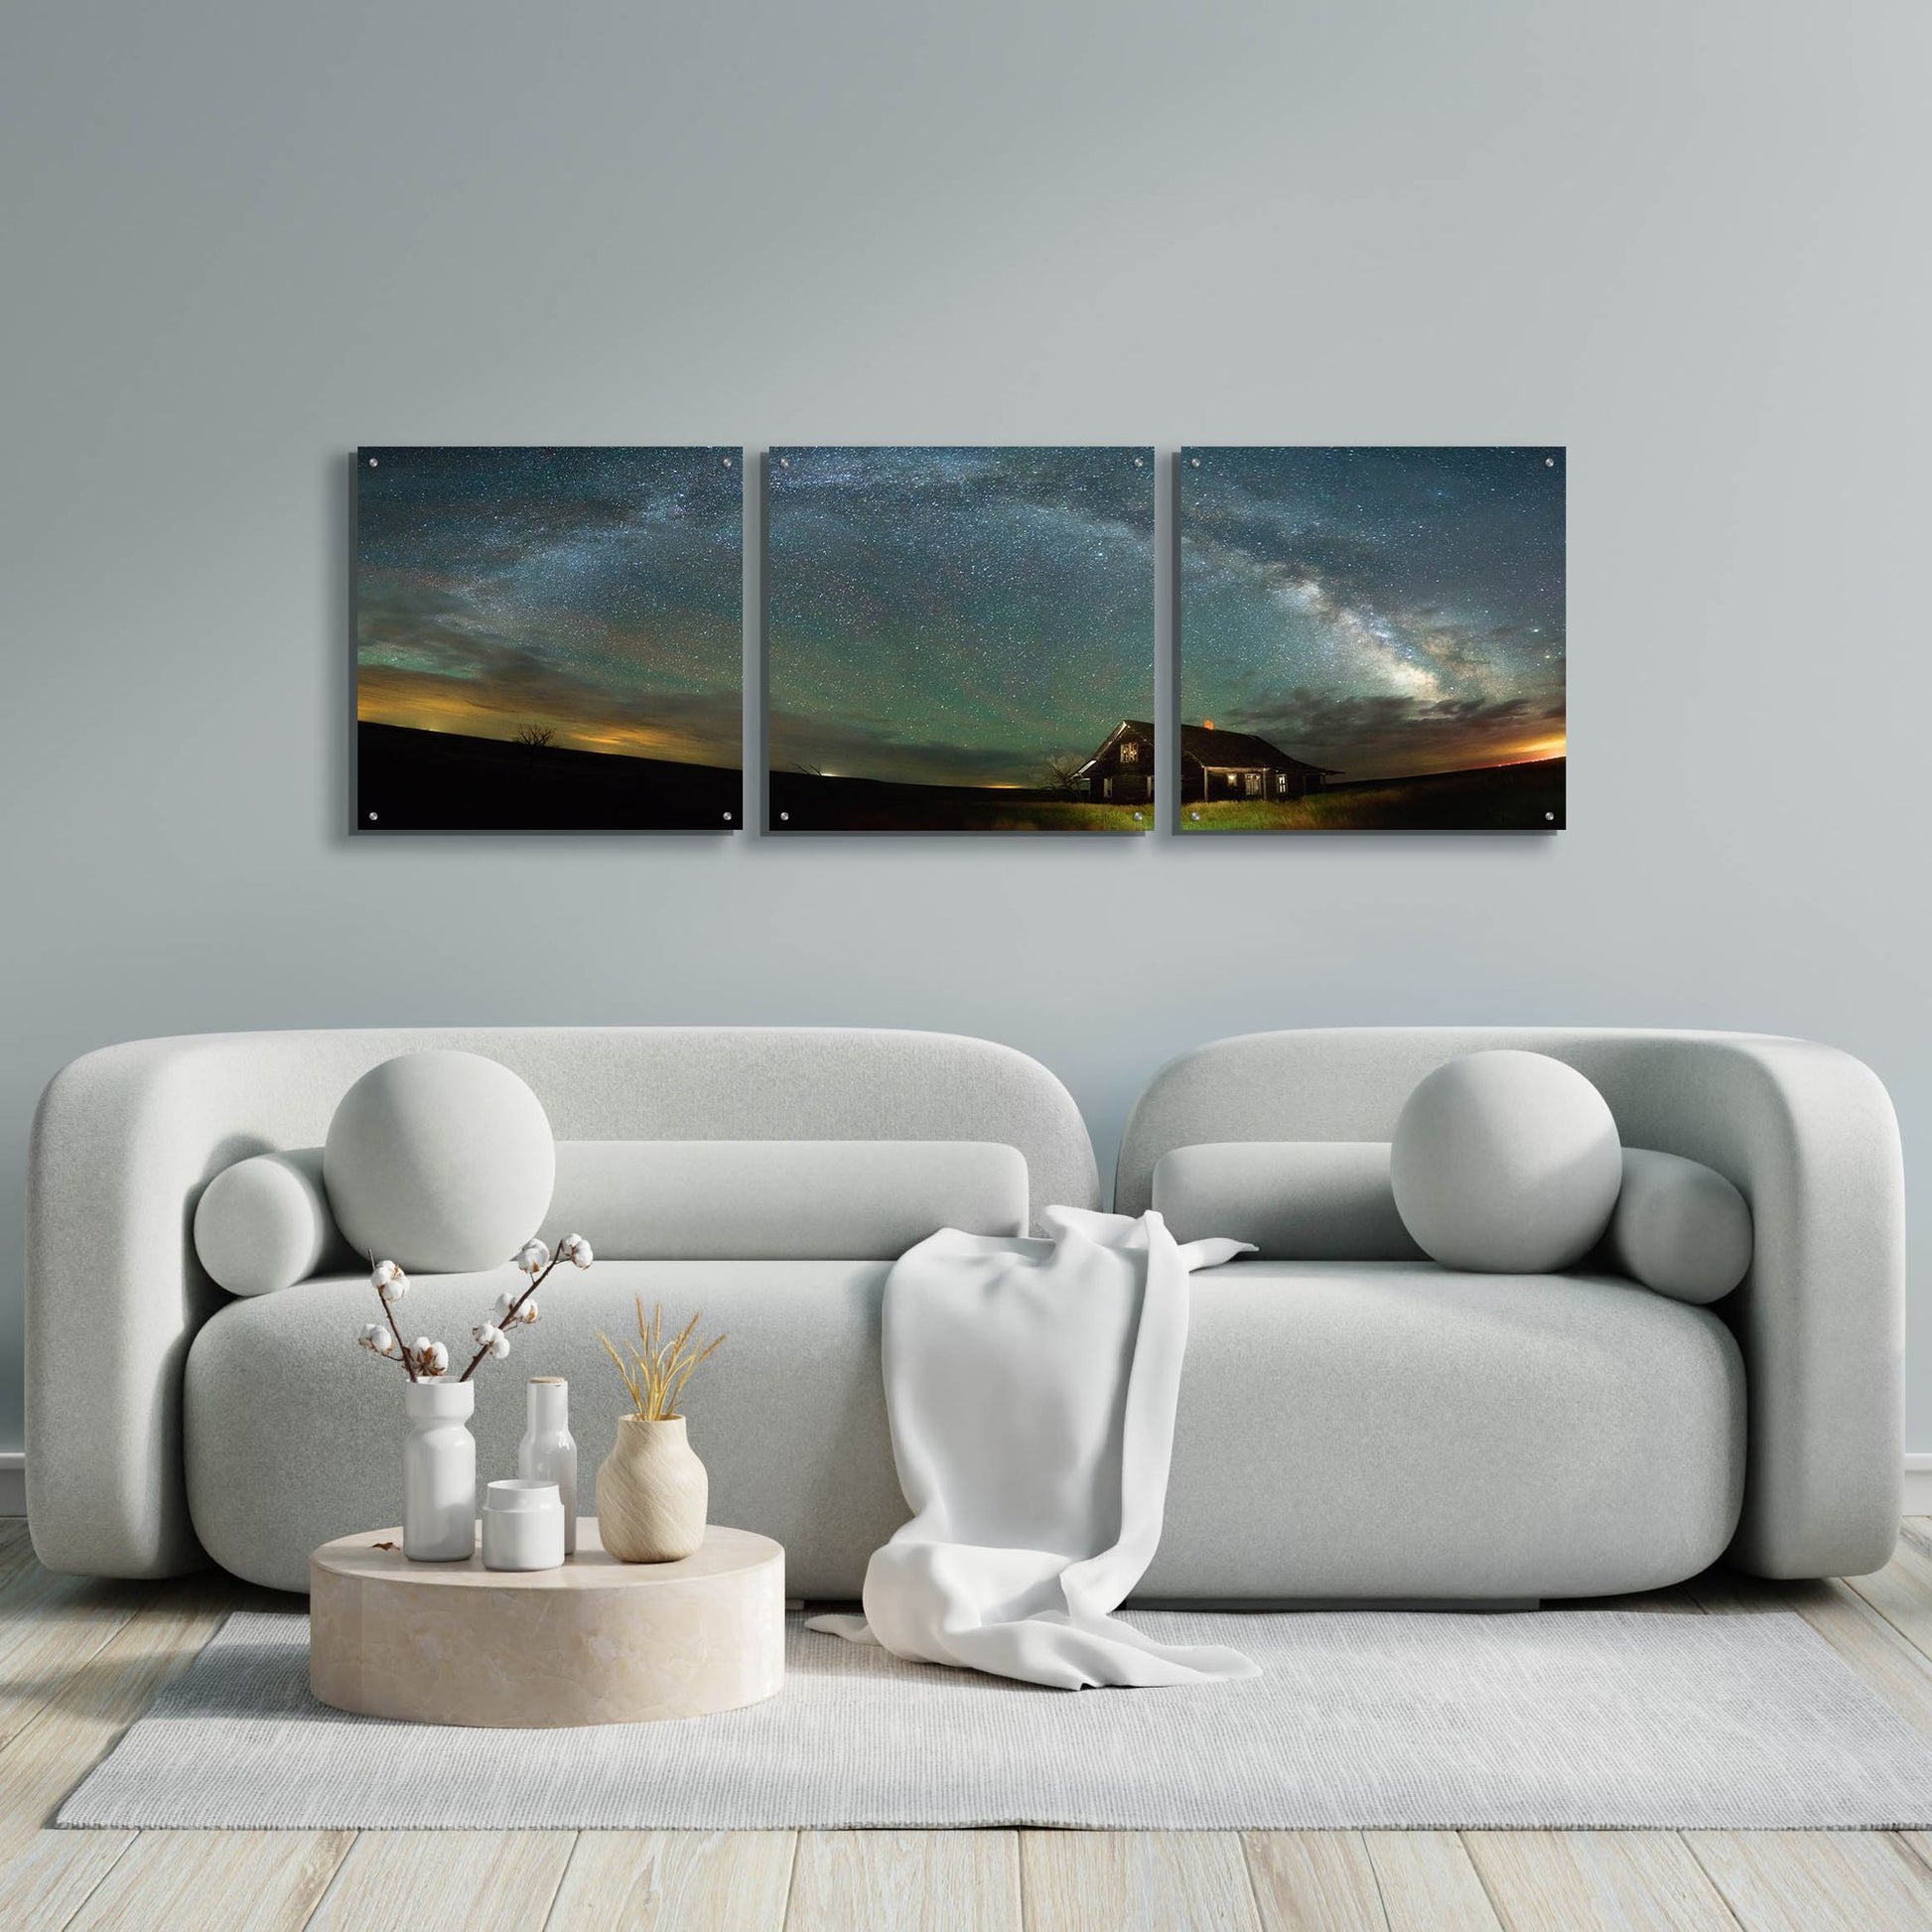 Epic Art 'Abandoned on the Plains' by Darren White, Acrylic Glass Wall Art, 3 Piece Set,72x24